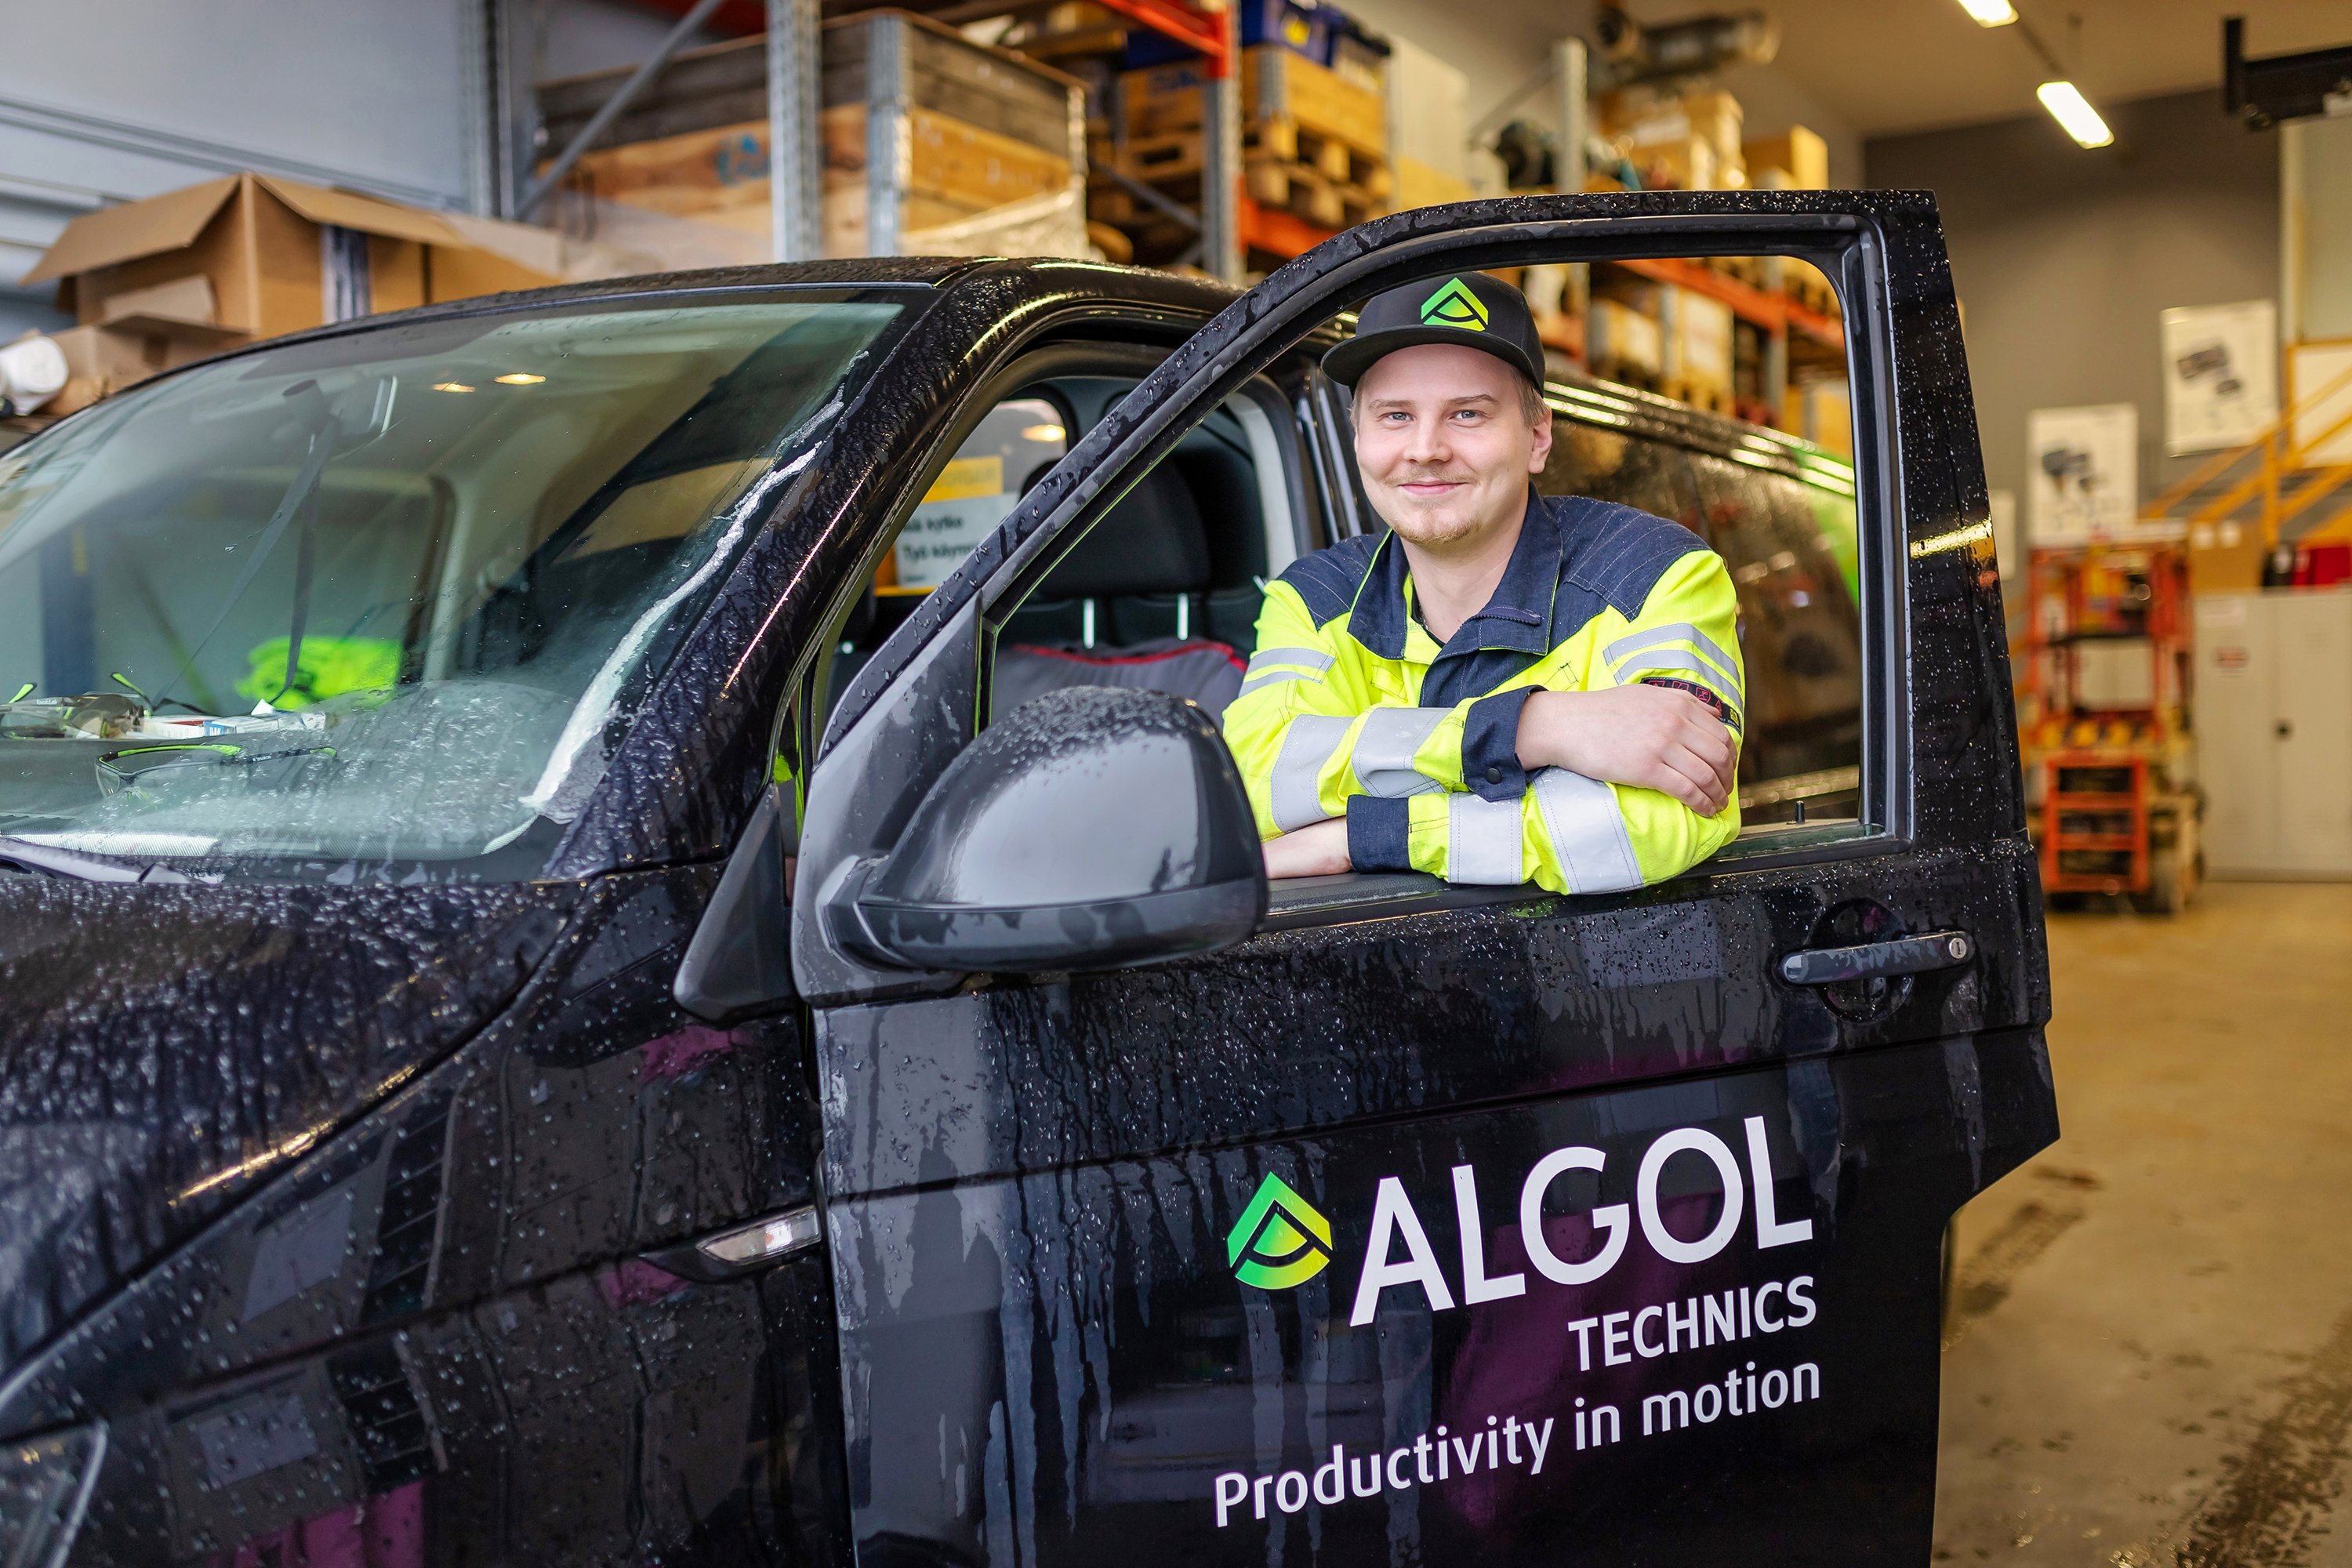 Algol is a Finnish family-owned business